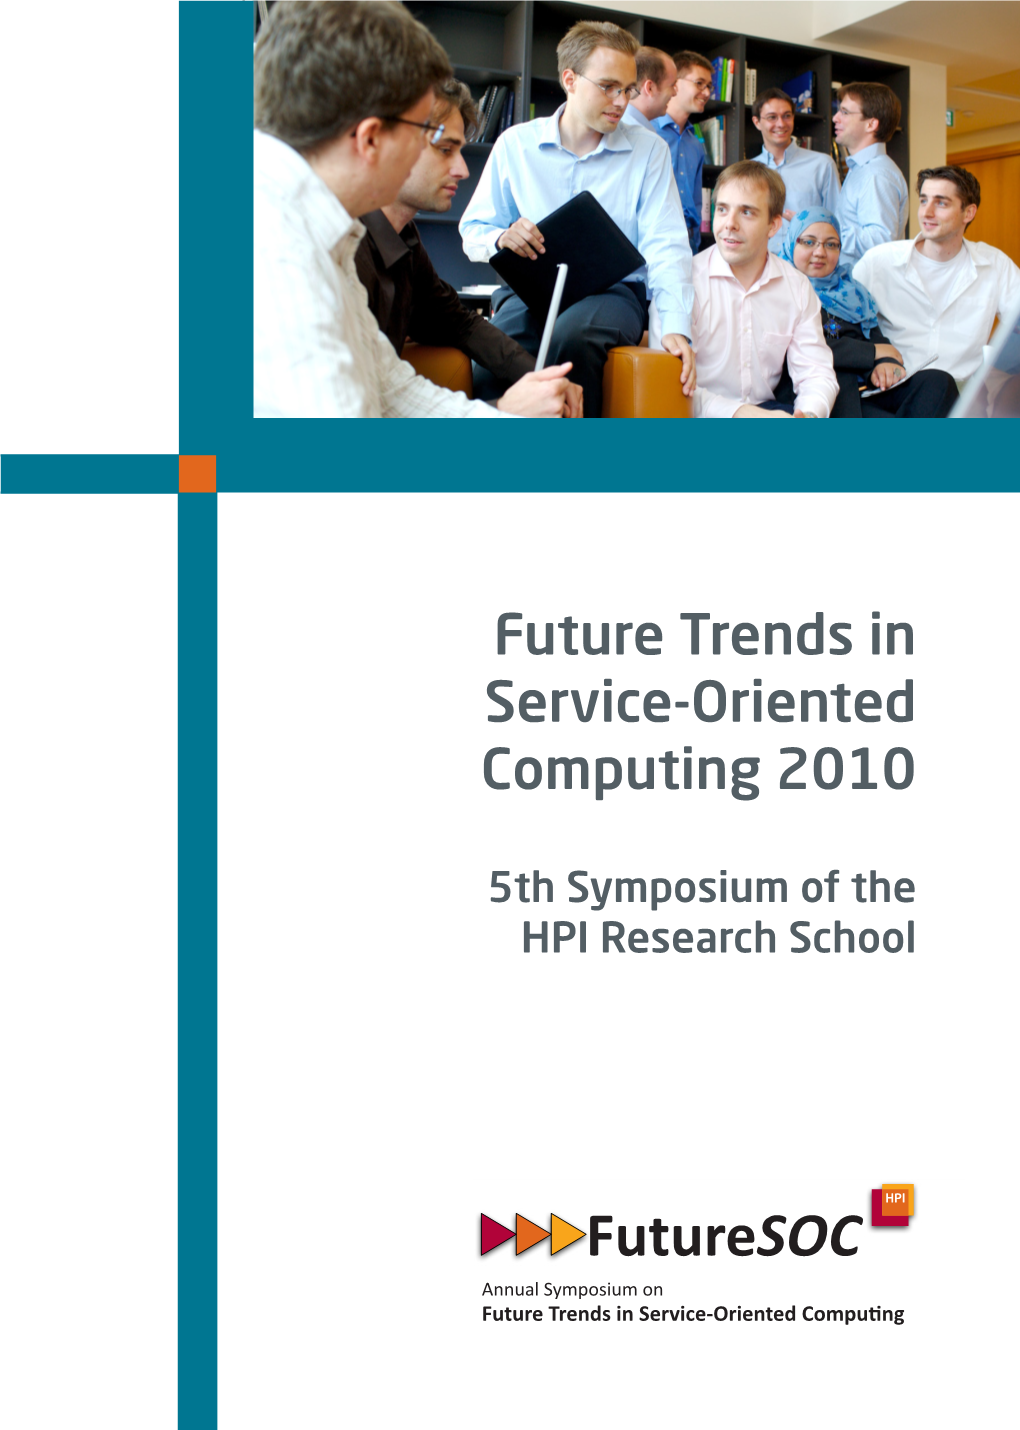 Futuresoc Annual Symposium on Future Trends in Service‐Oriented Compu5ng1 Contents